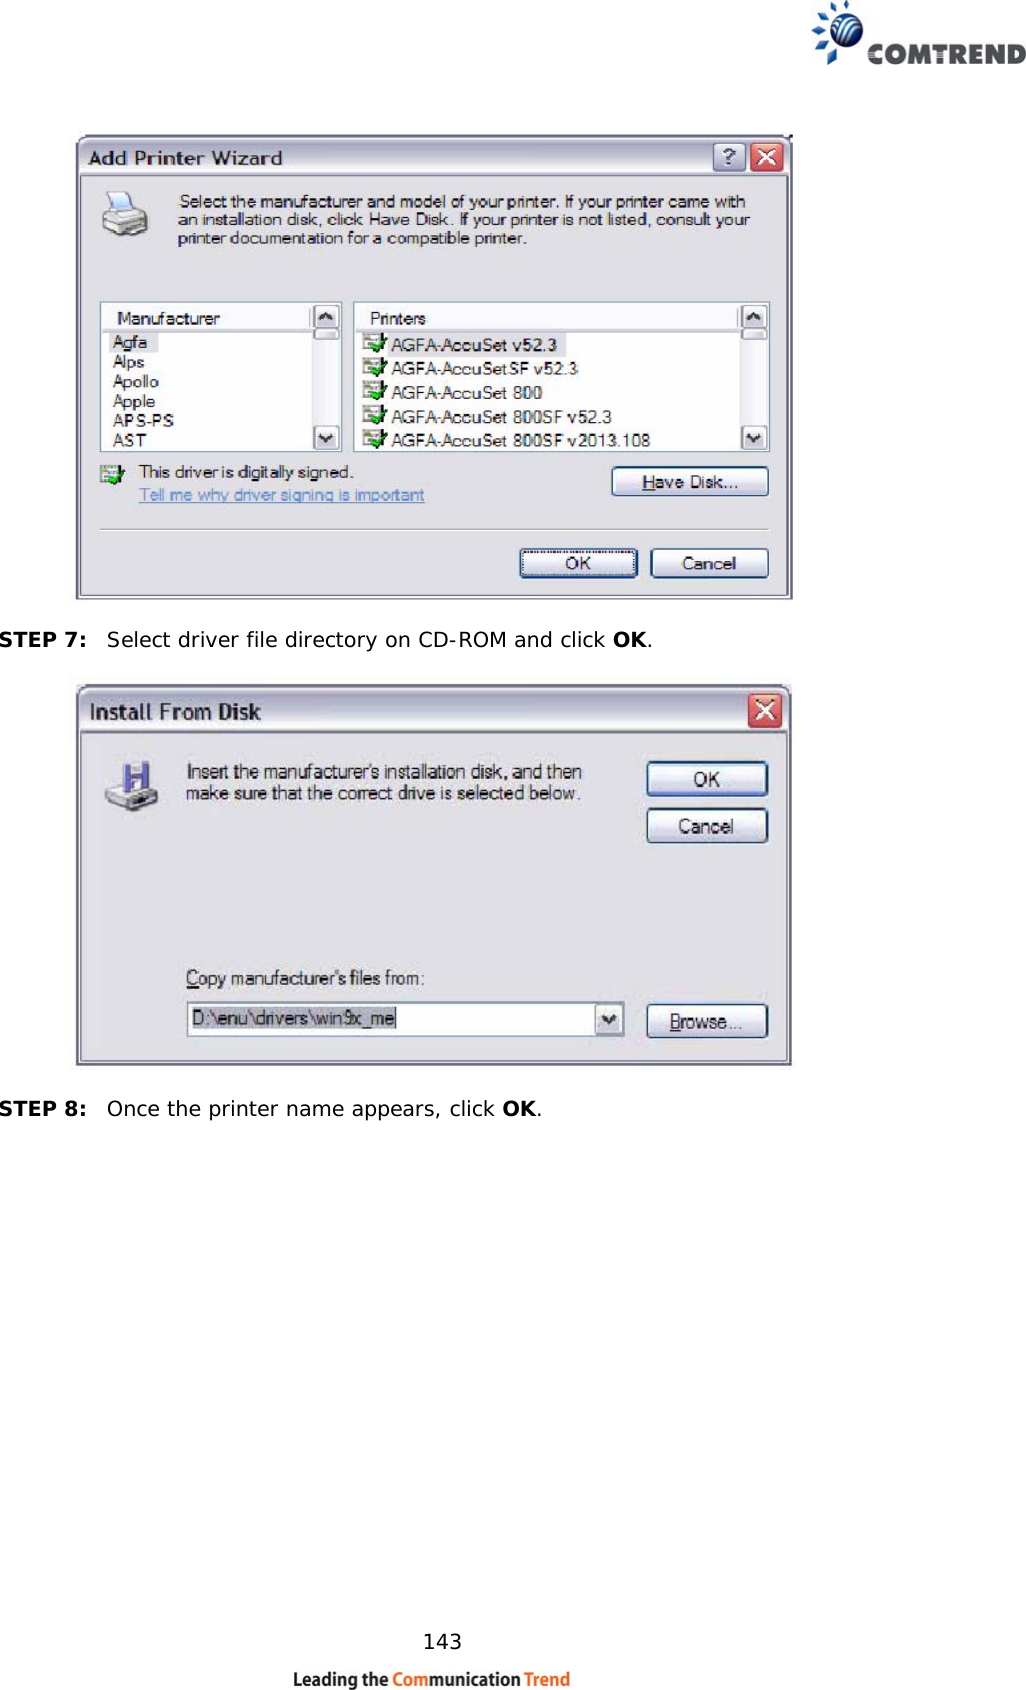    143   STEP 7:  Select driver file directory on CD-ROM and click OK.    STEP 8:  Once the printer name appears, click OK.  